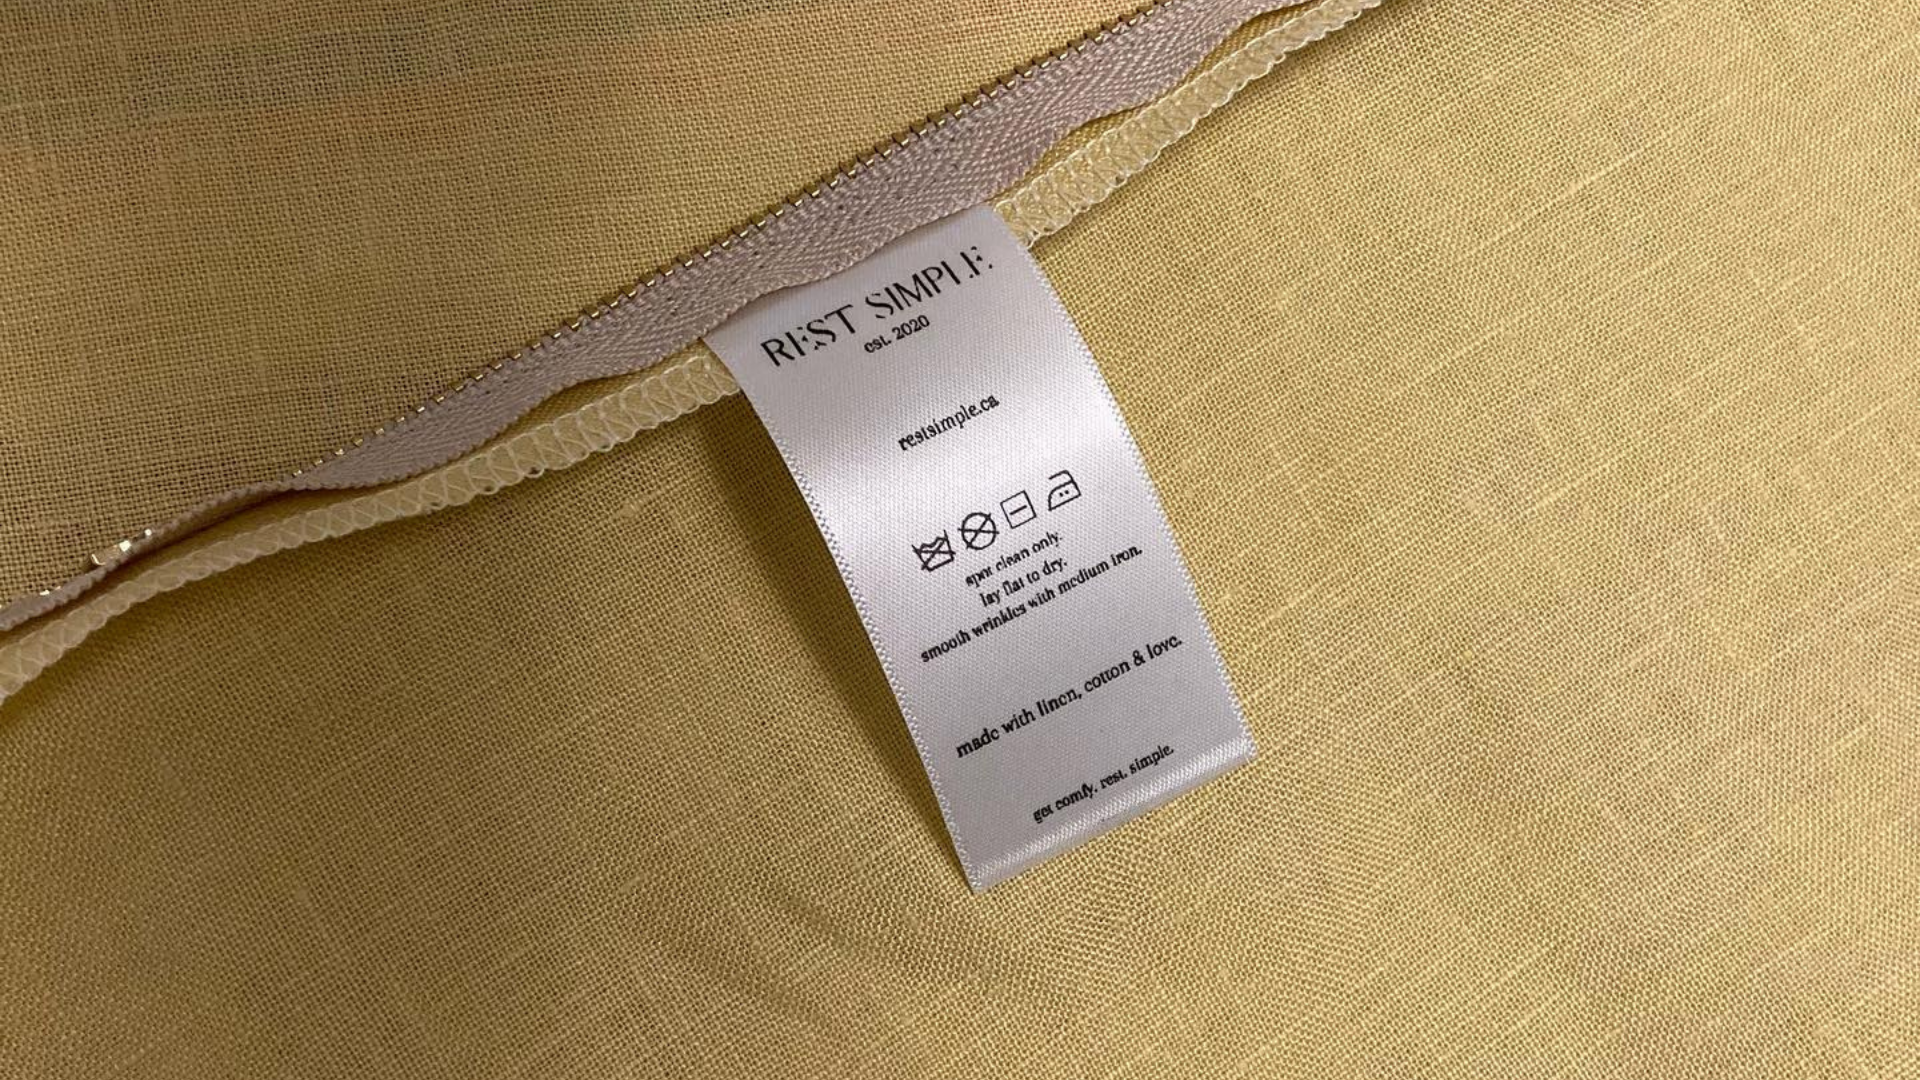 001 why the care label says, made withlove – Rest Simple